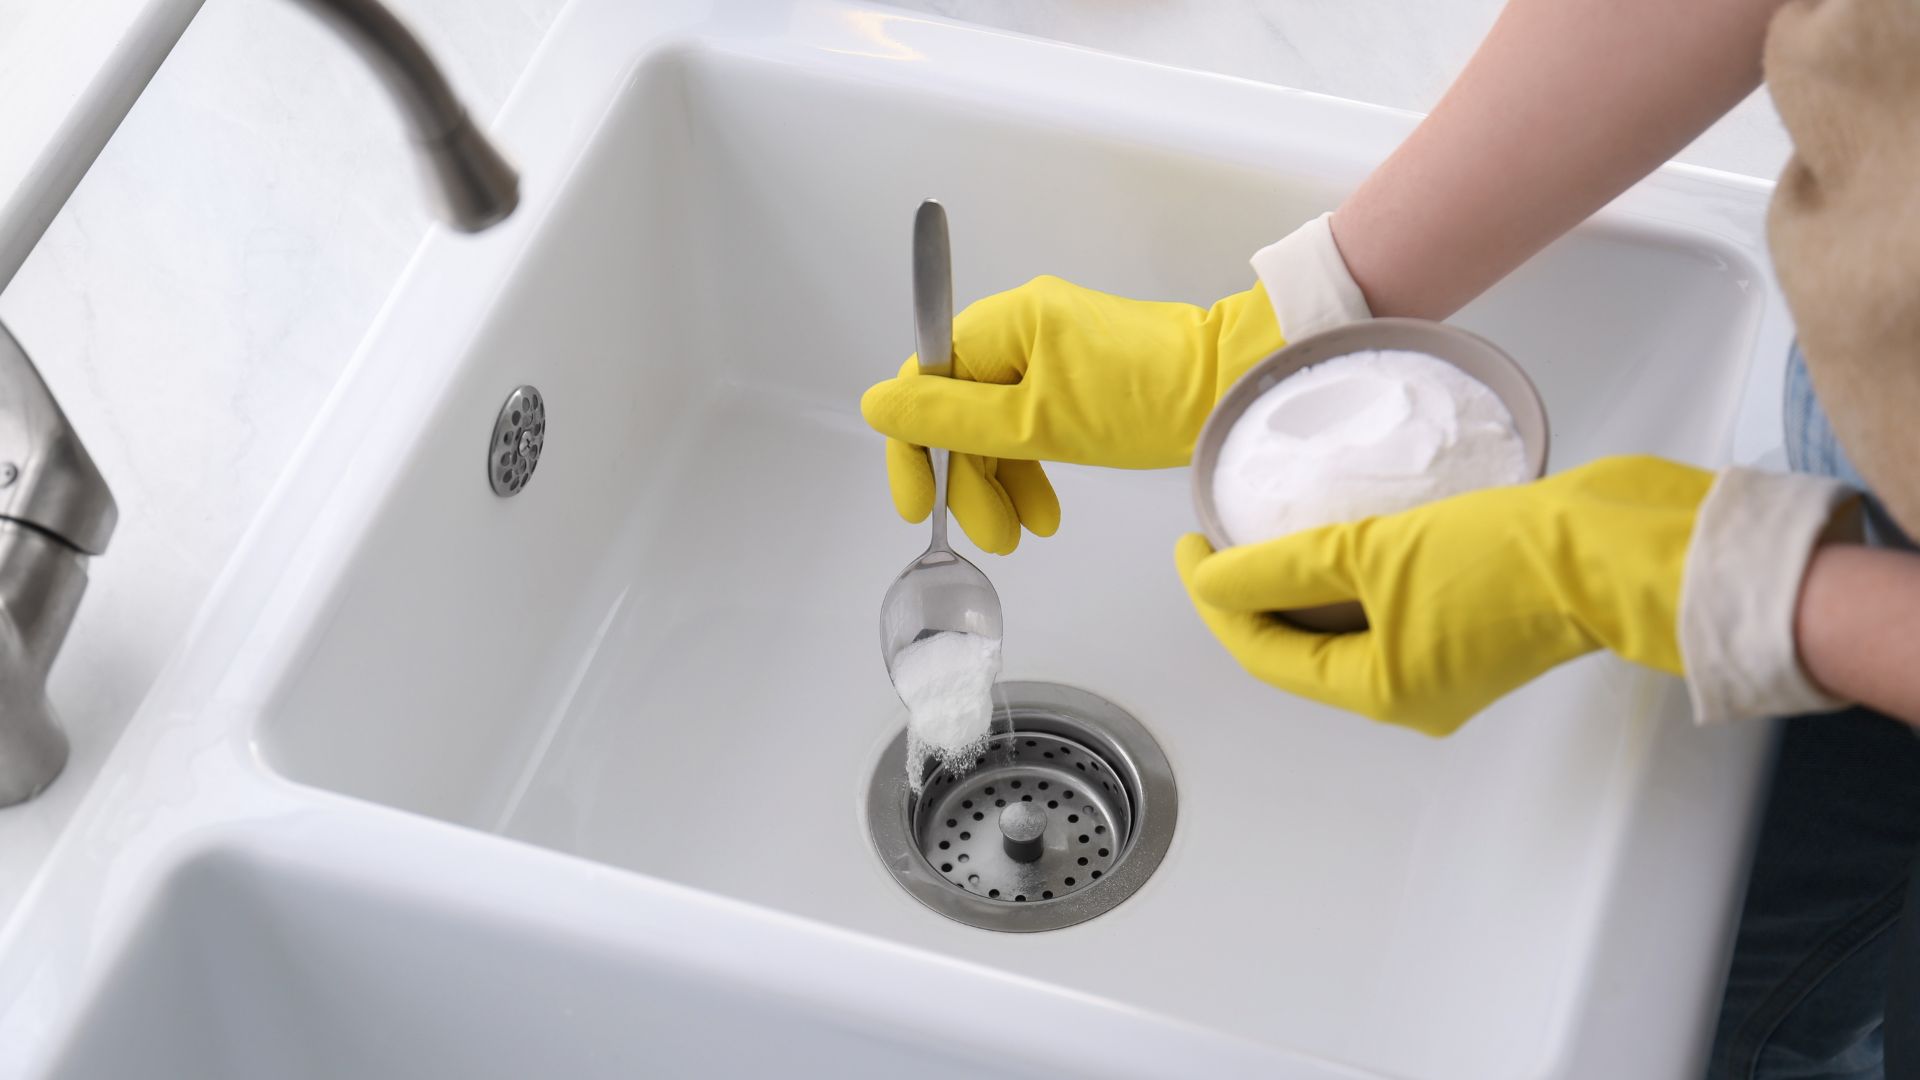 Plumbers Recommend Using Baking Soda and Vinegar